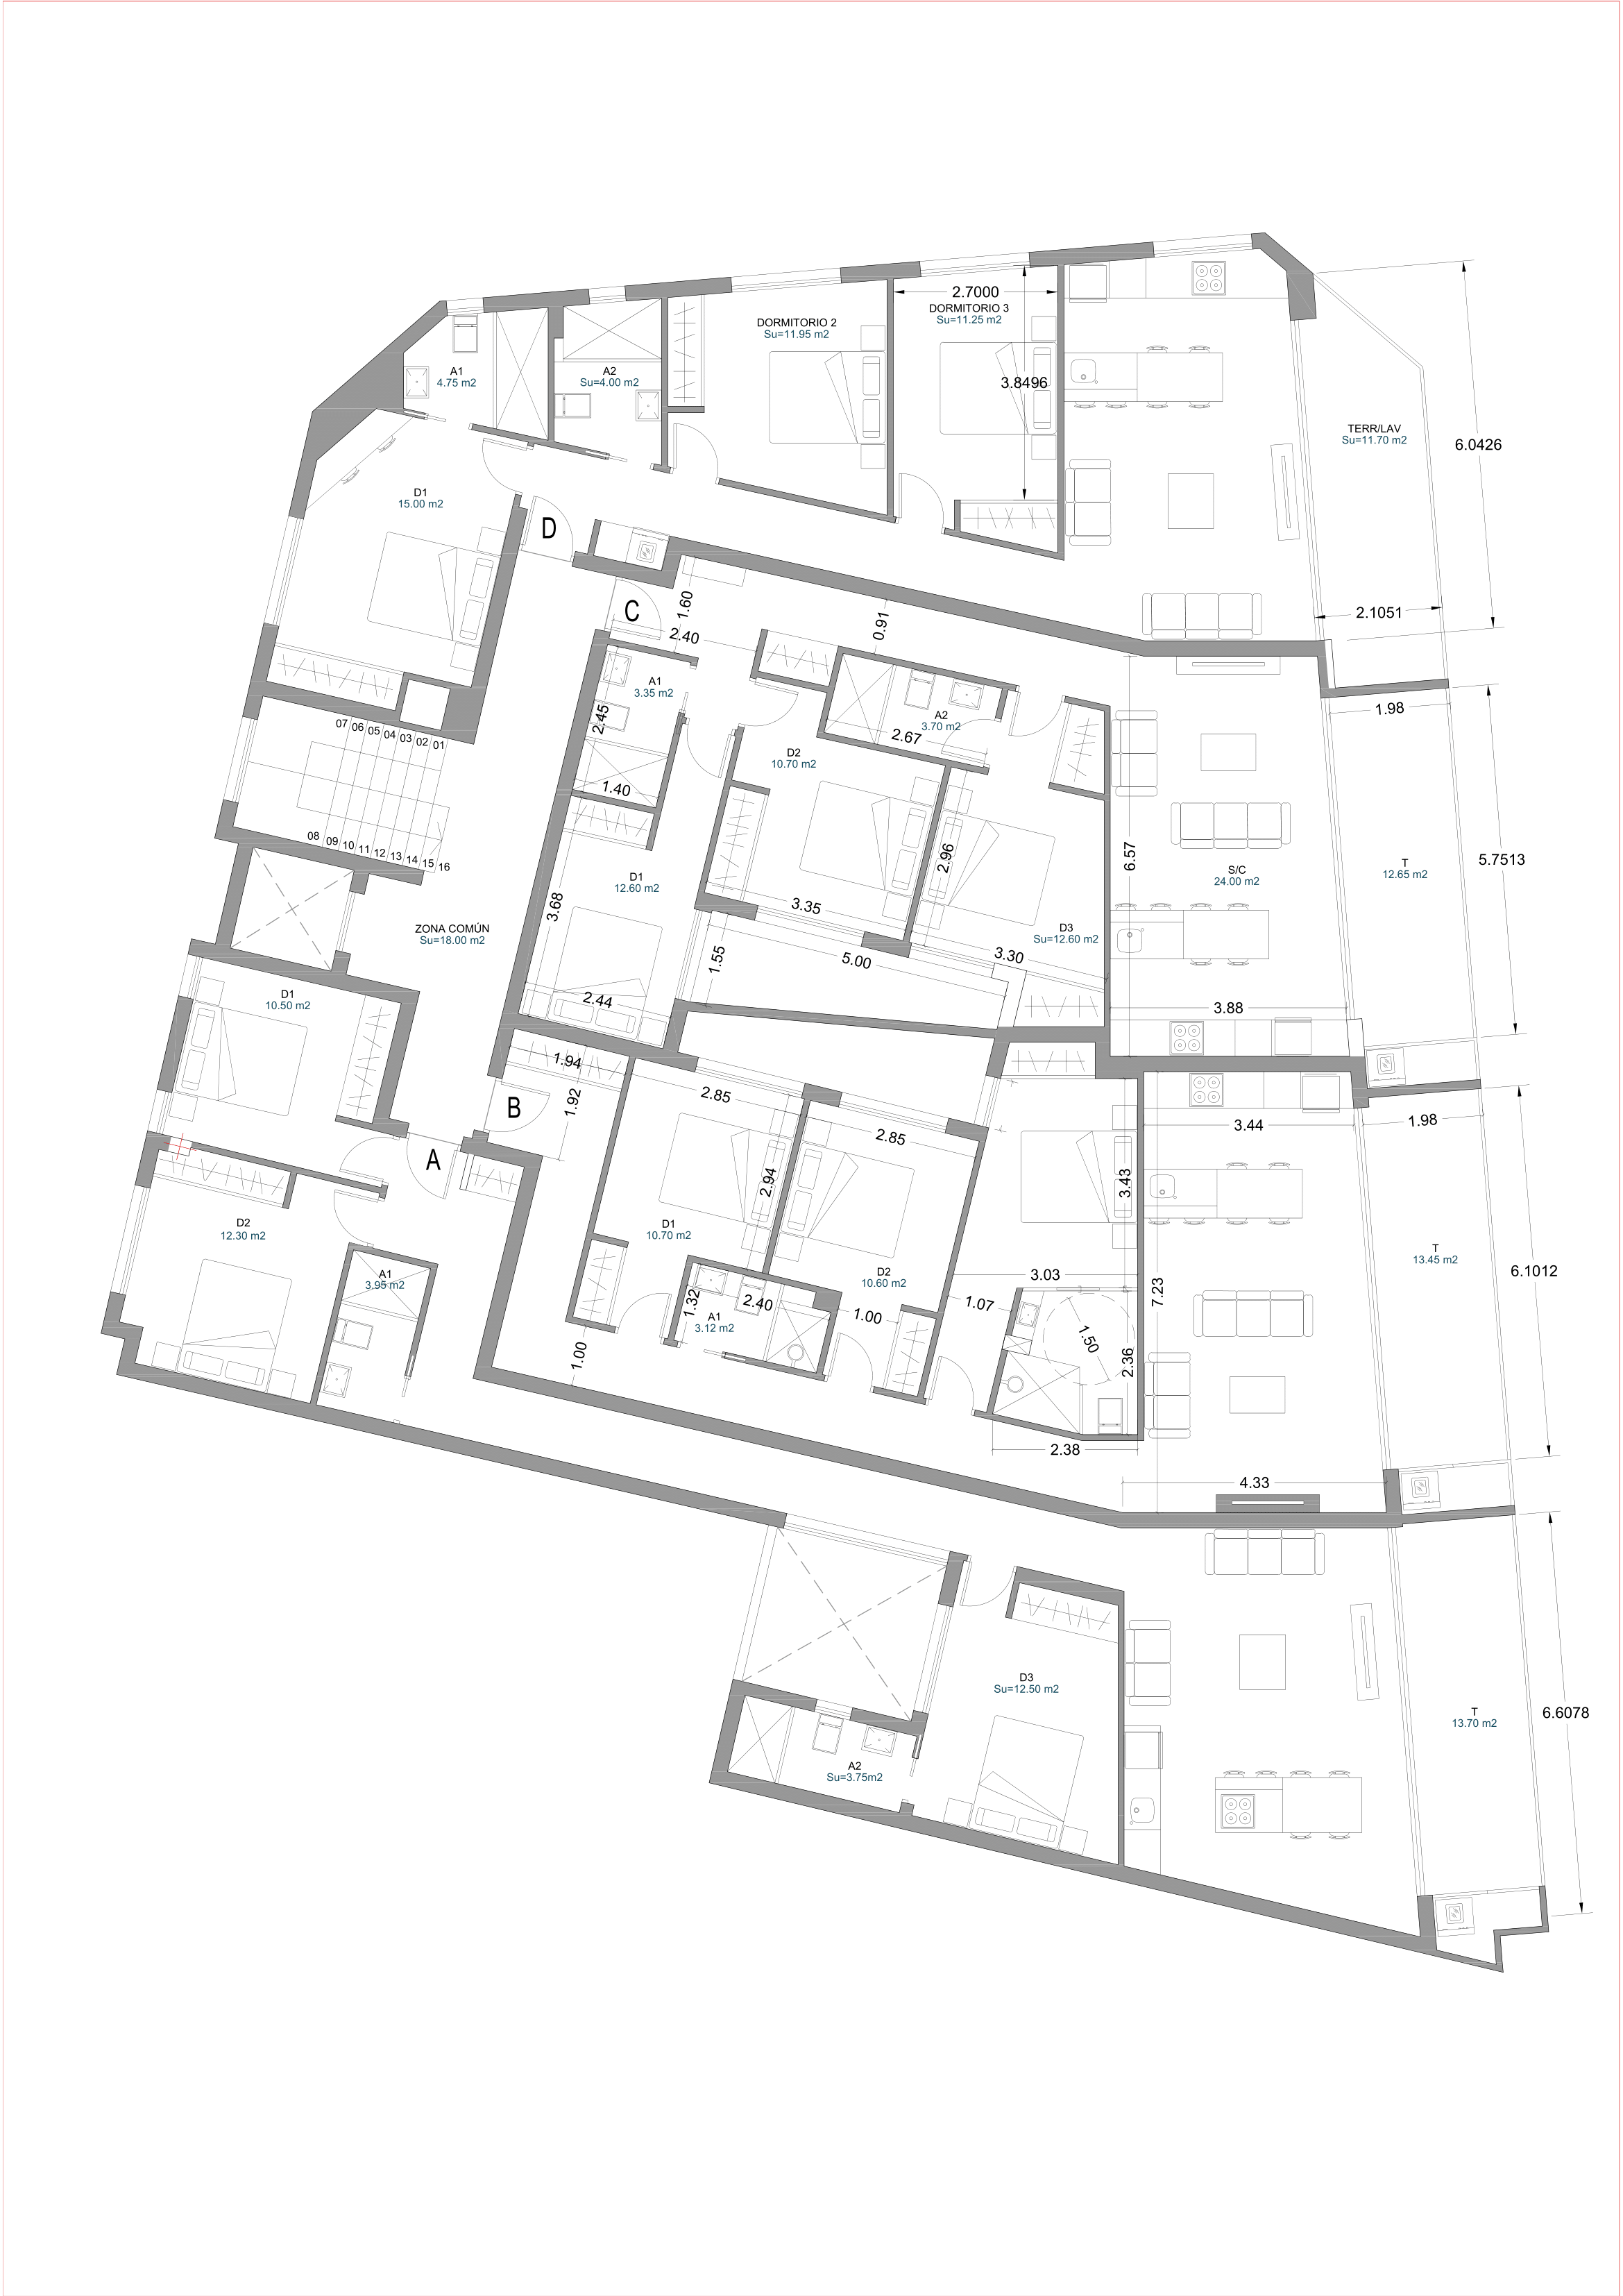 Plan of the flat